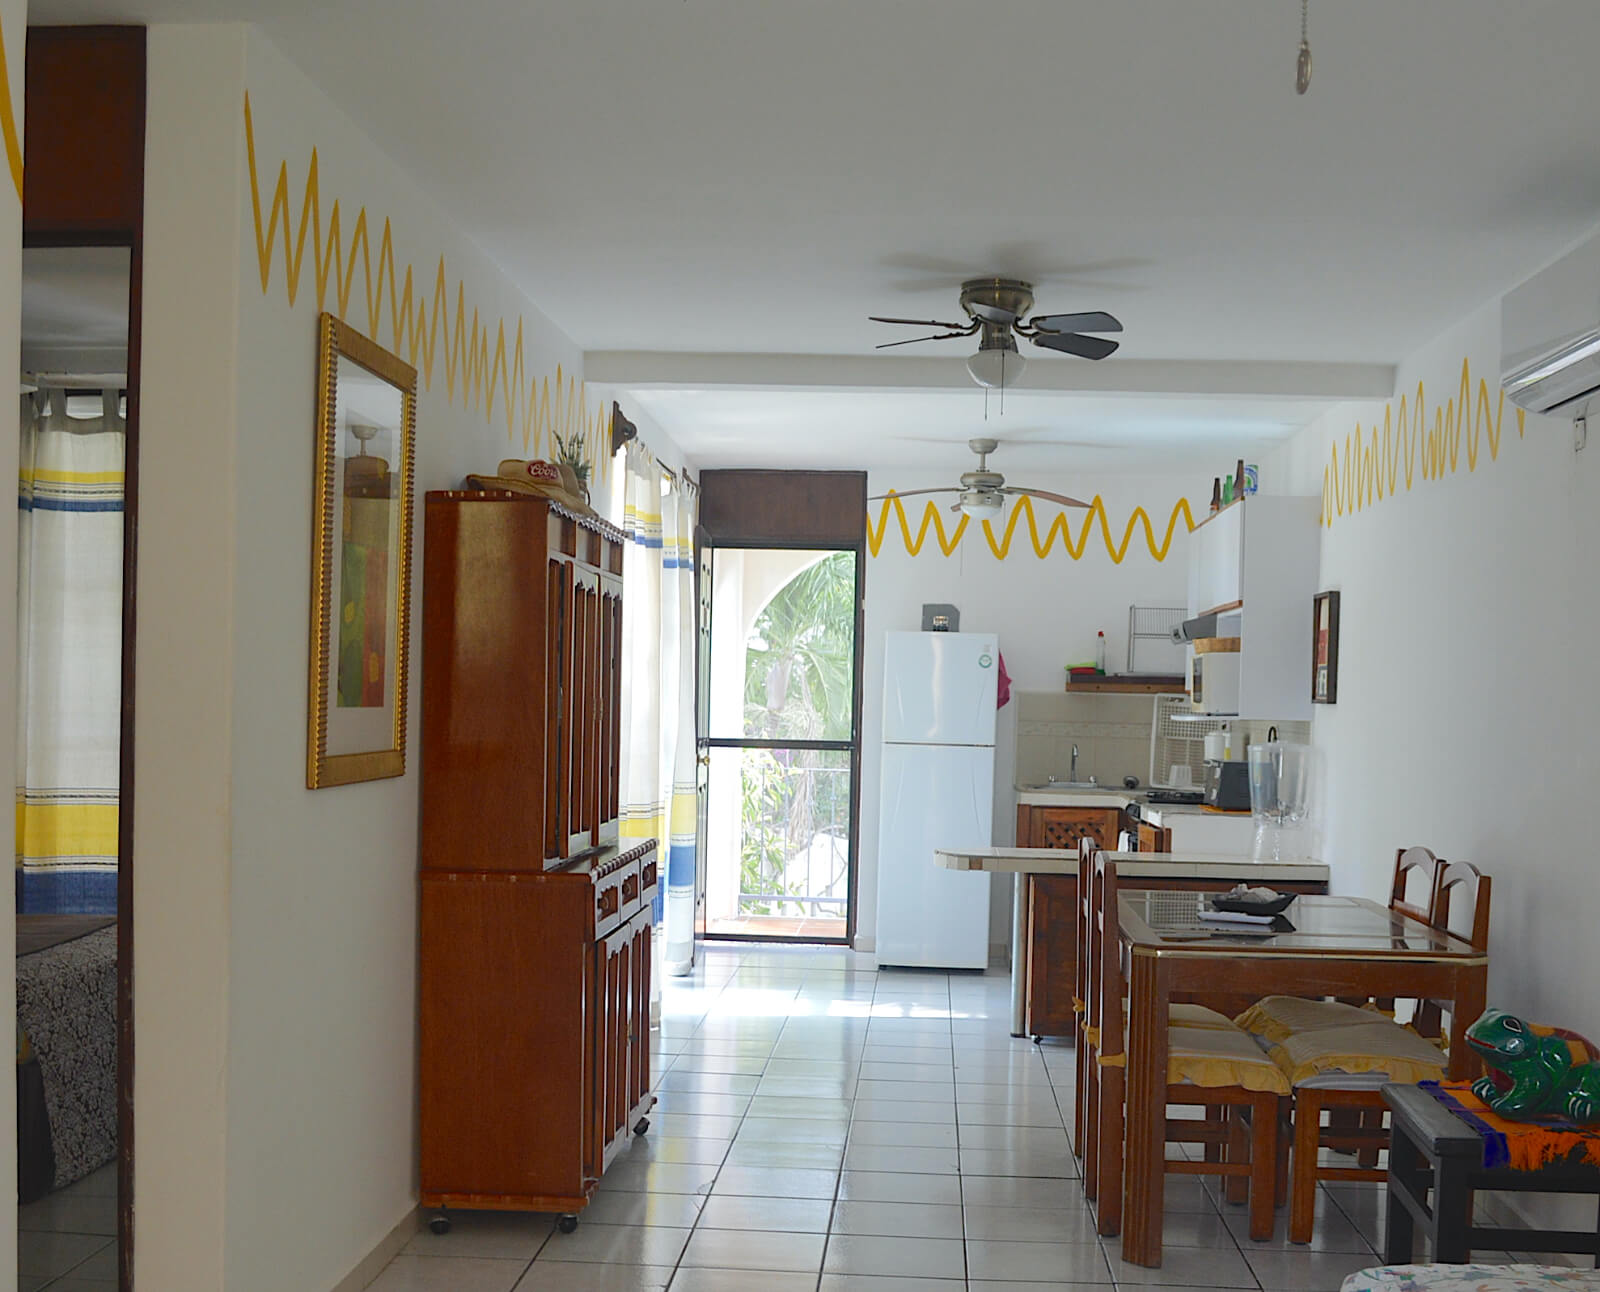 Condominium with amenities, pools, Rooftop with barbecue, for sale near Bahía Chahue, Huatulco